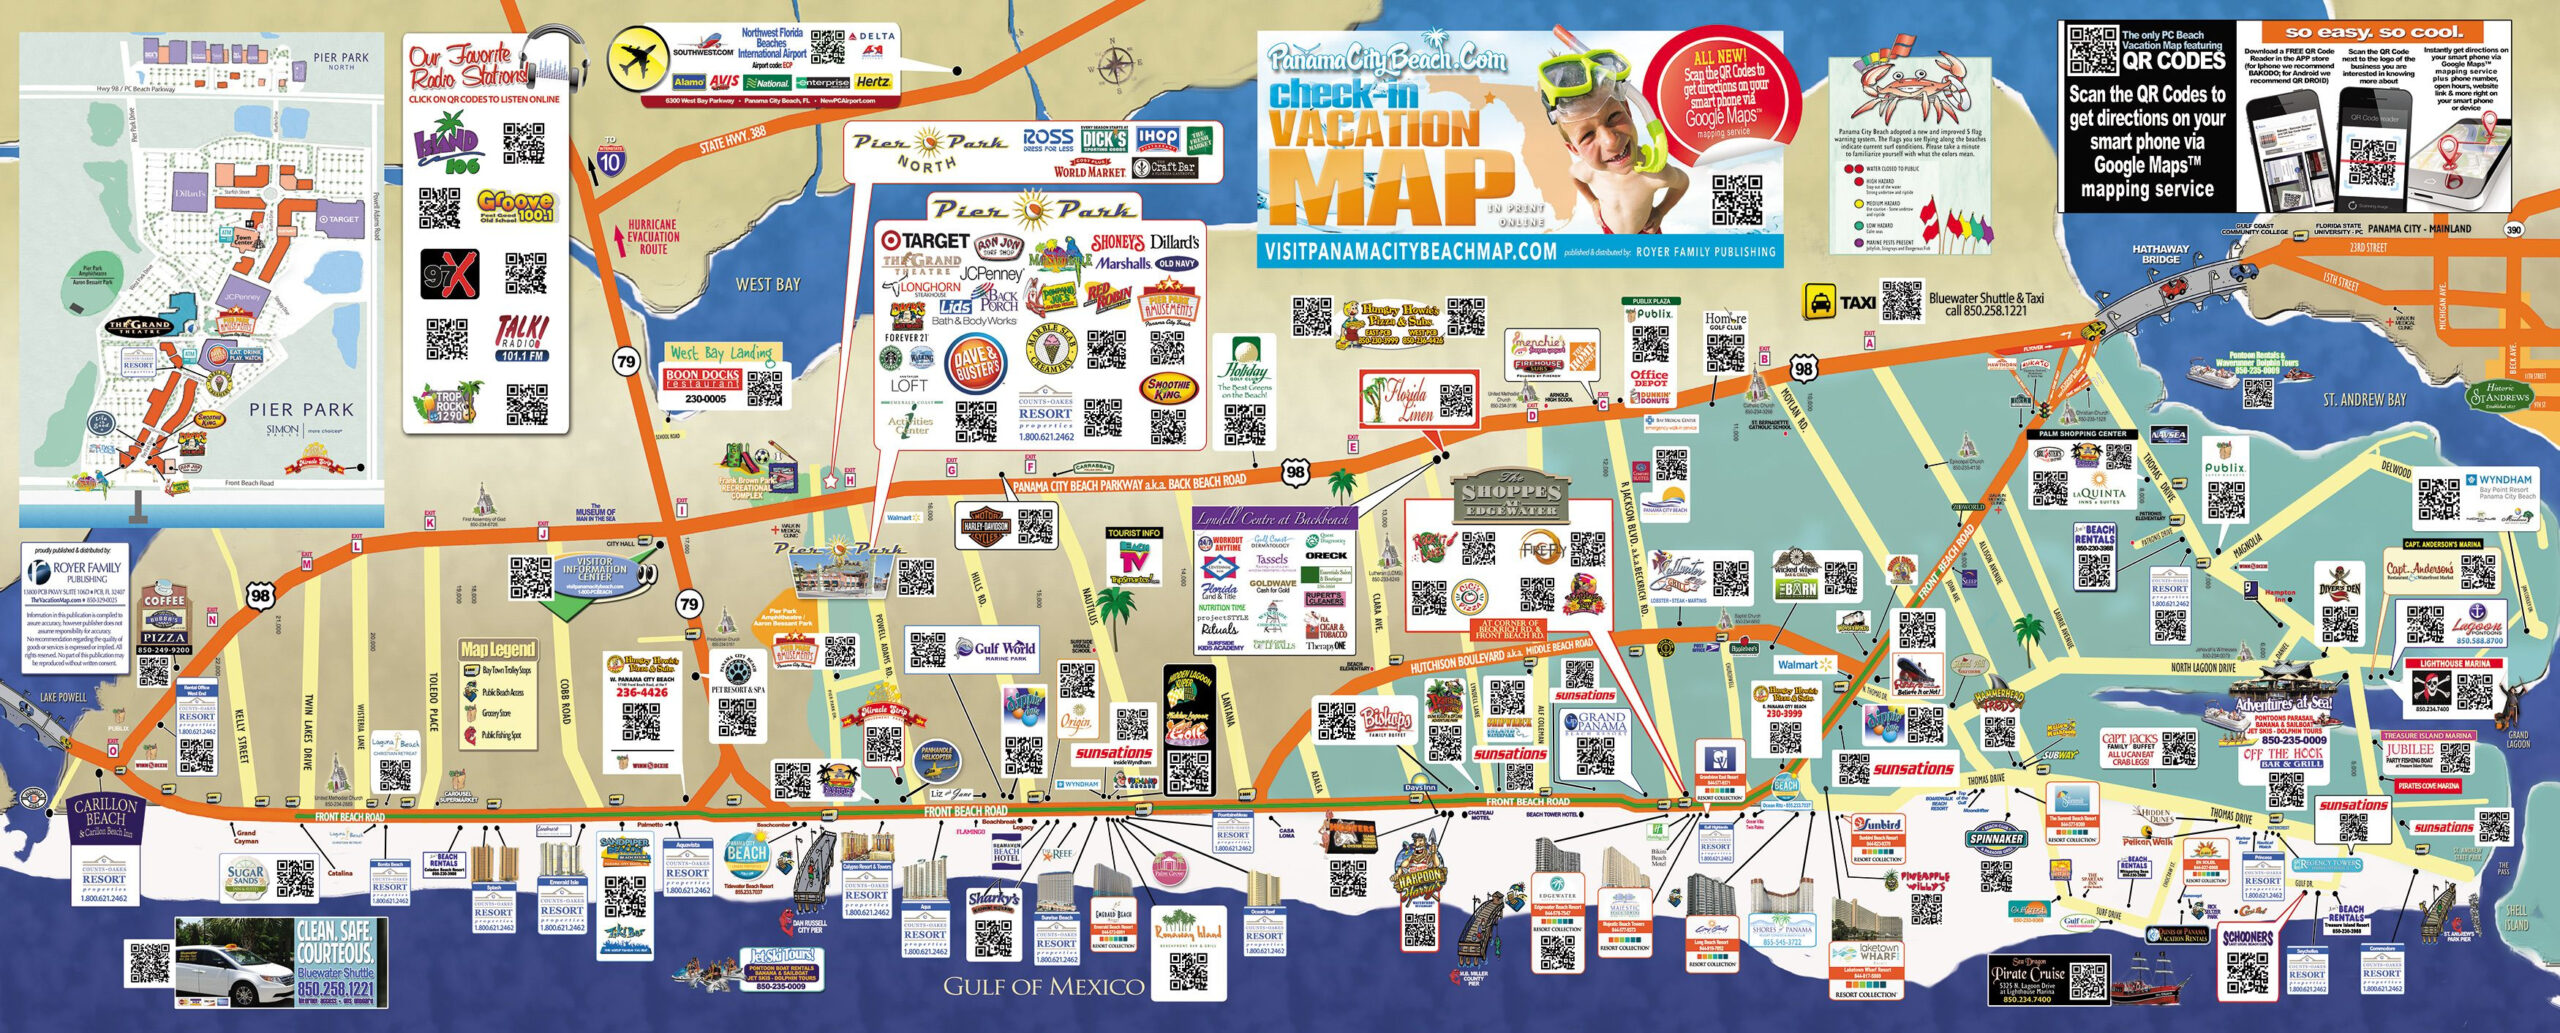 See The Map Online The Official Visitors Map For Panama City Beach 